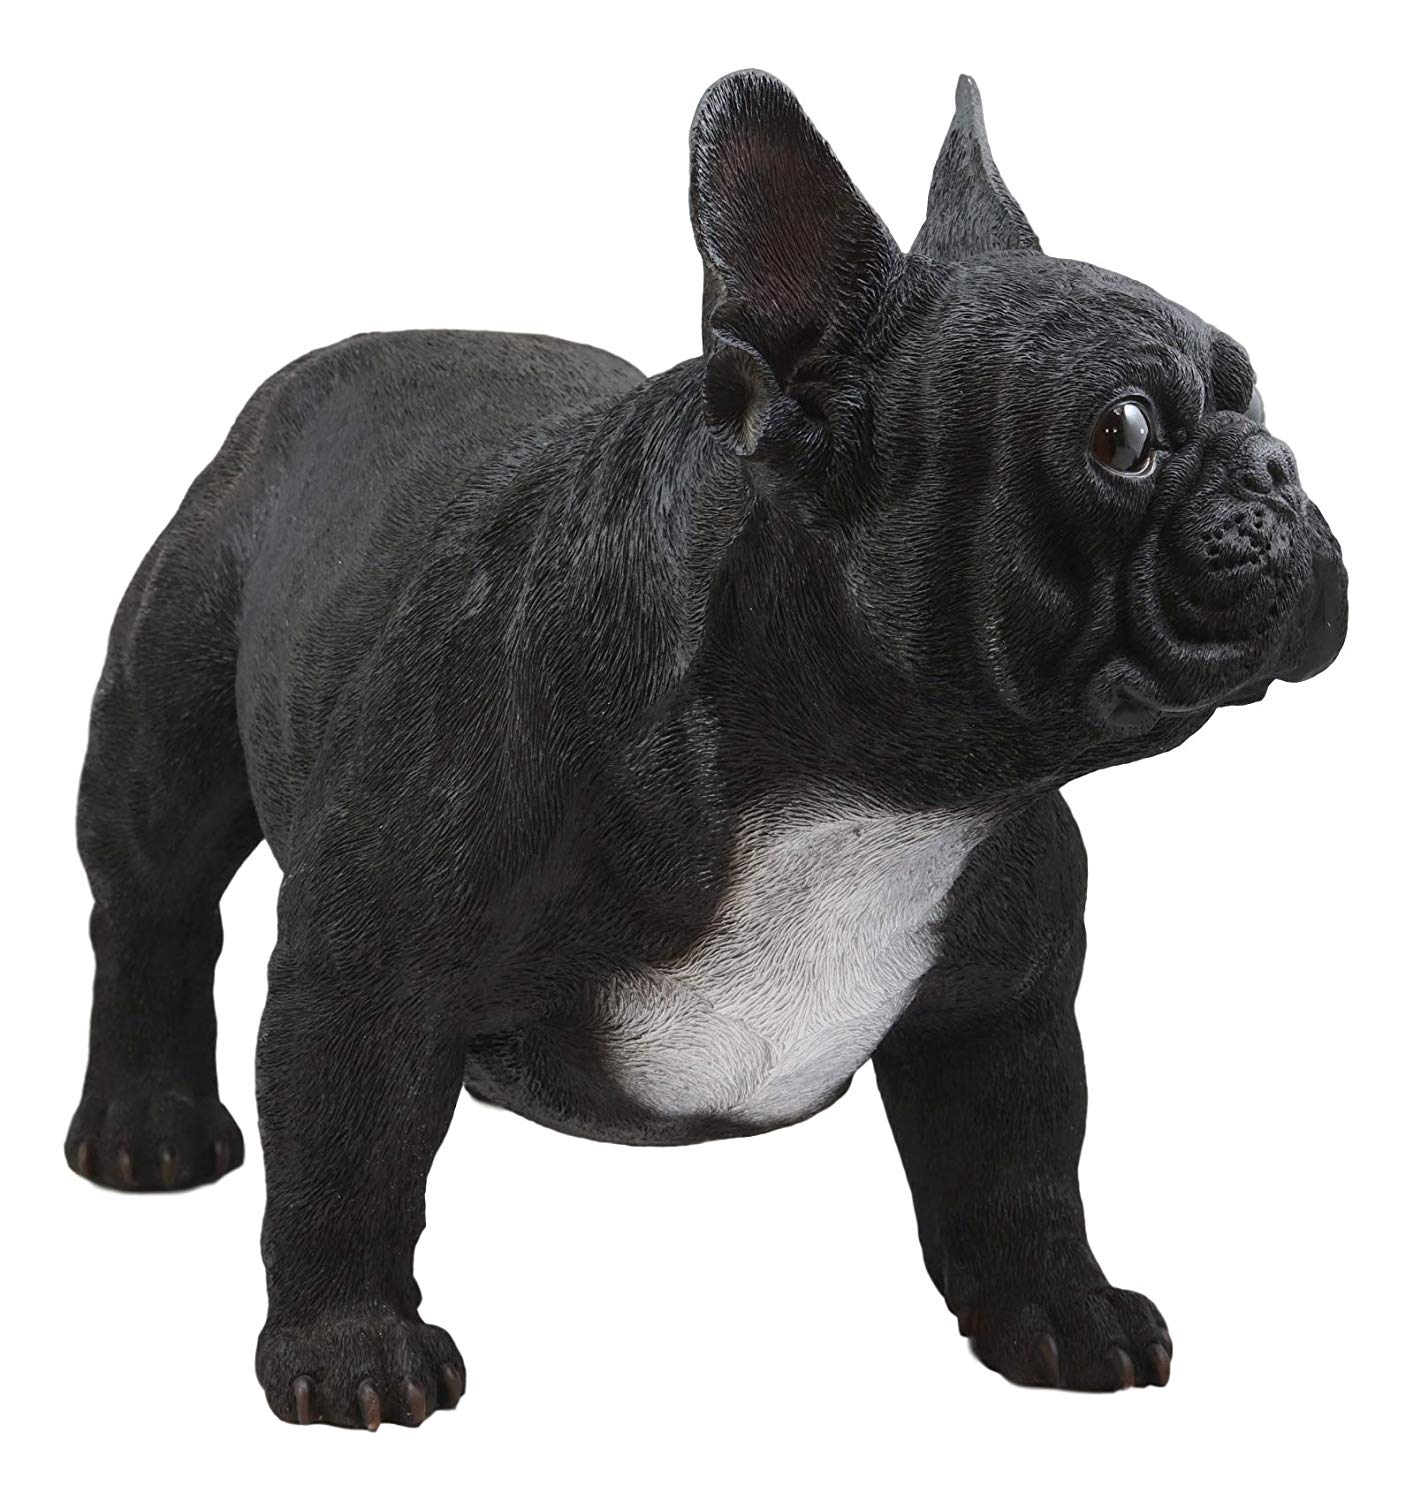 Ebros Adorable Large Lifelike Realistic Black French Bulldog Statue with Glass Eyes 19.5" Long Frenchie Figurine Pedigree Breed Animal Theme Dogs Puppy Puppies Sculpture - image 3 of 4